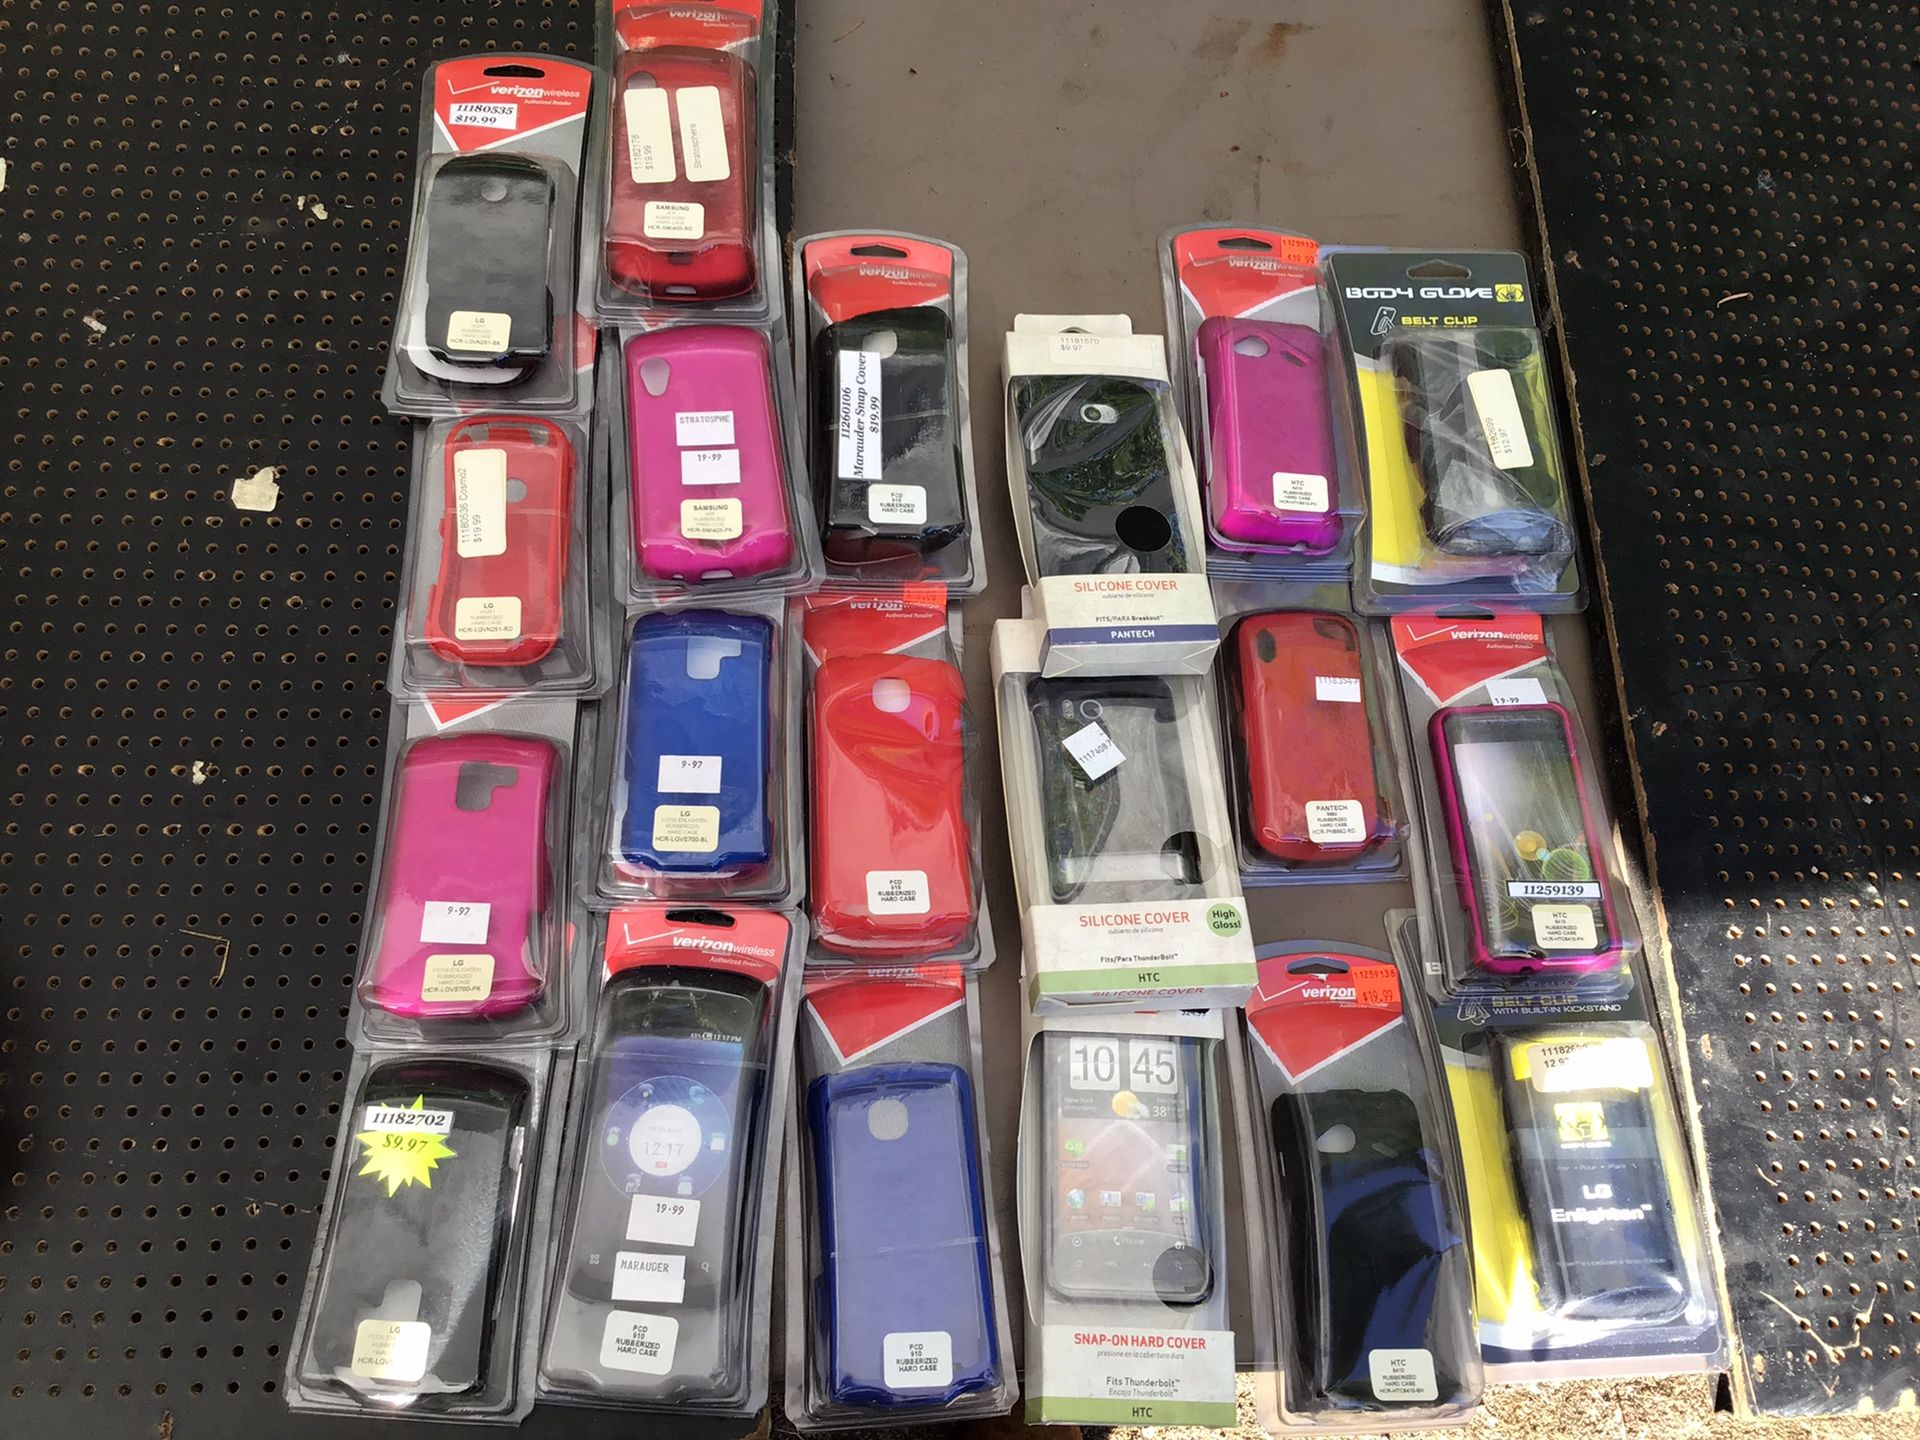 Free Cell Phone Case! Free Free Free! There’s 20 of them! All Brand New! Come get some! Free! Lake Stevens area